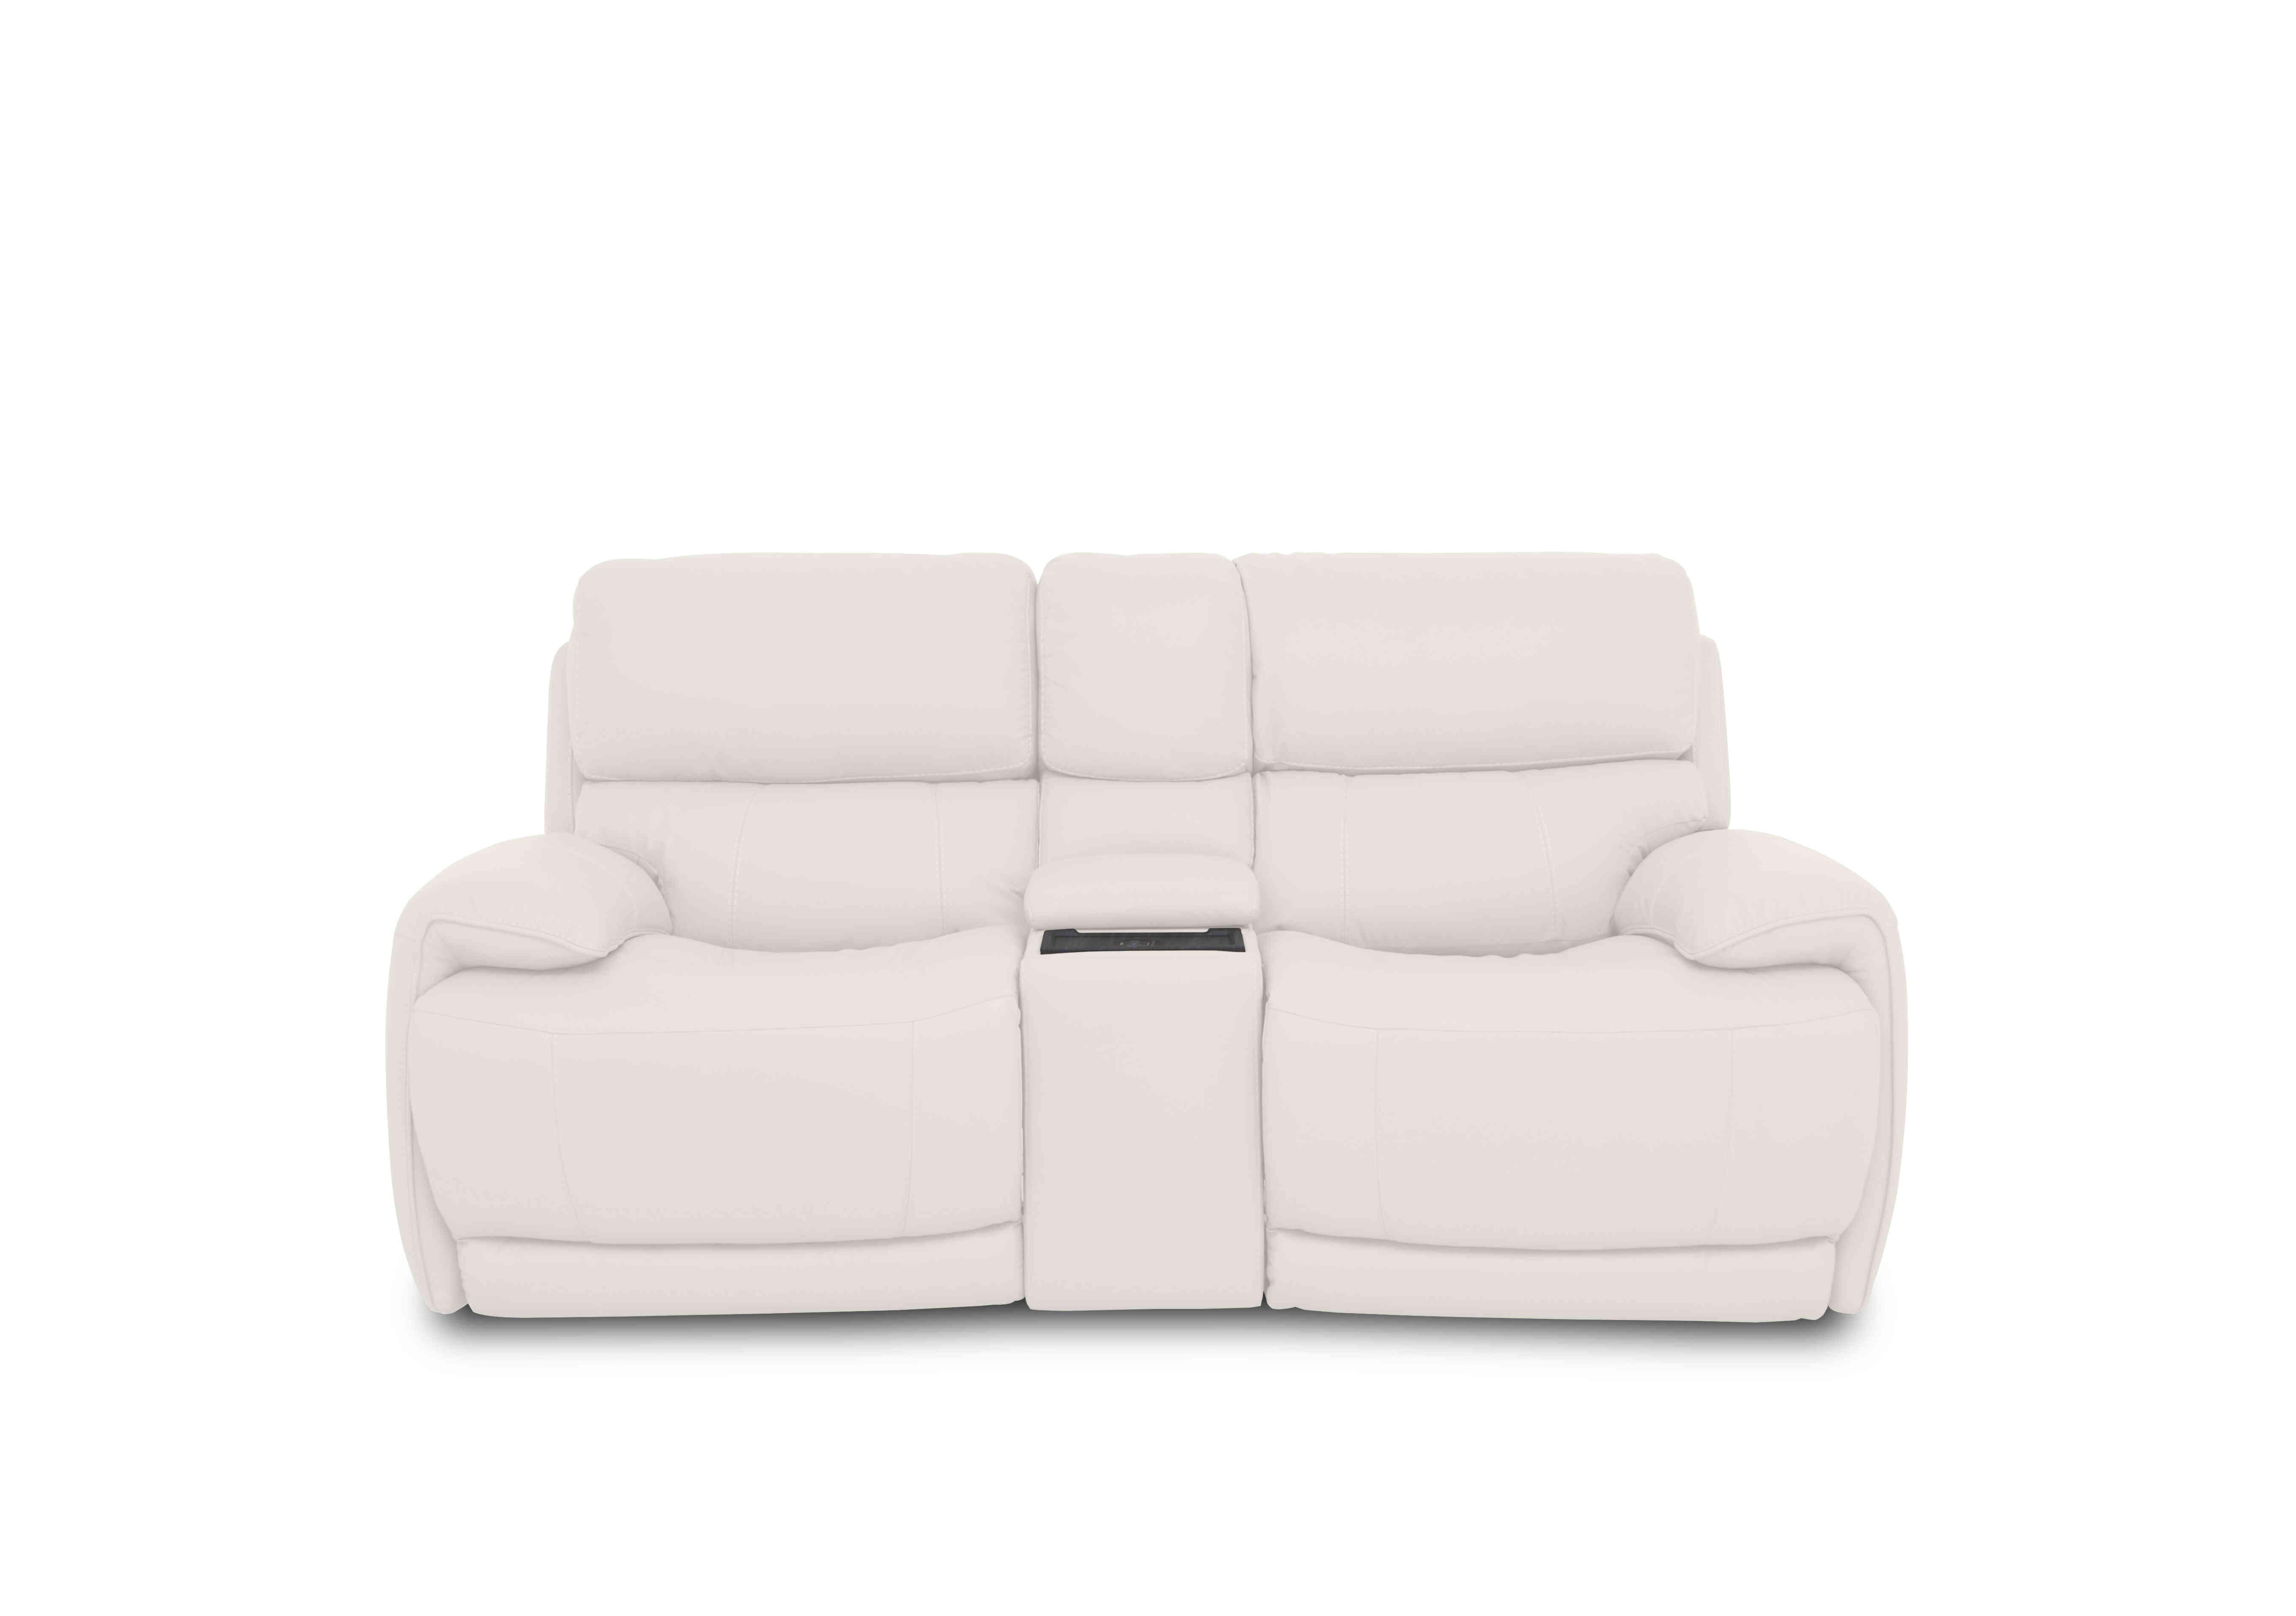 Rocco 2 Seater Leather Power Rocker Sofa with Cup Holders and Power Headrests in Bv-744d Star White on Furniture Village